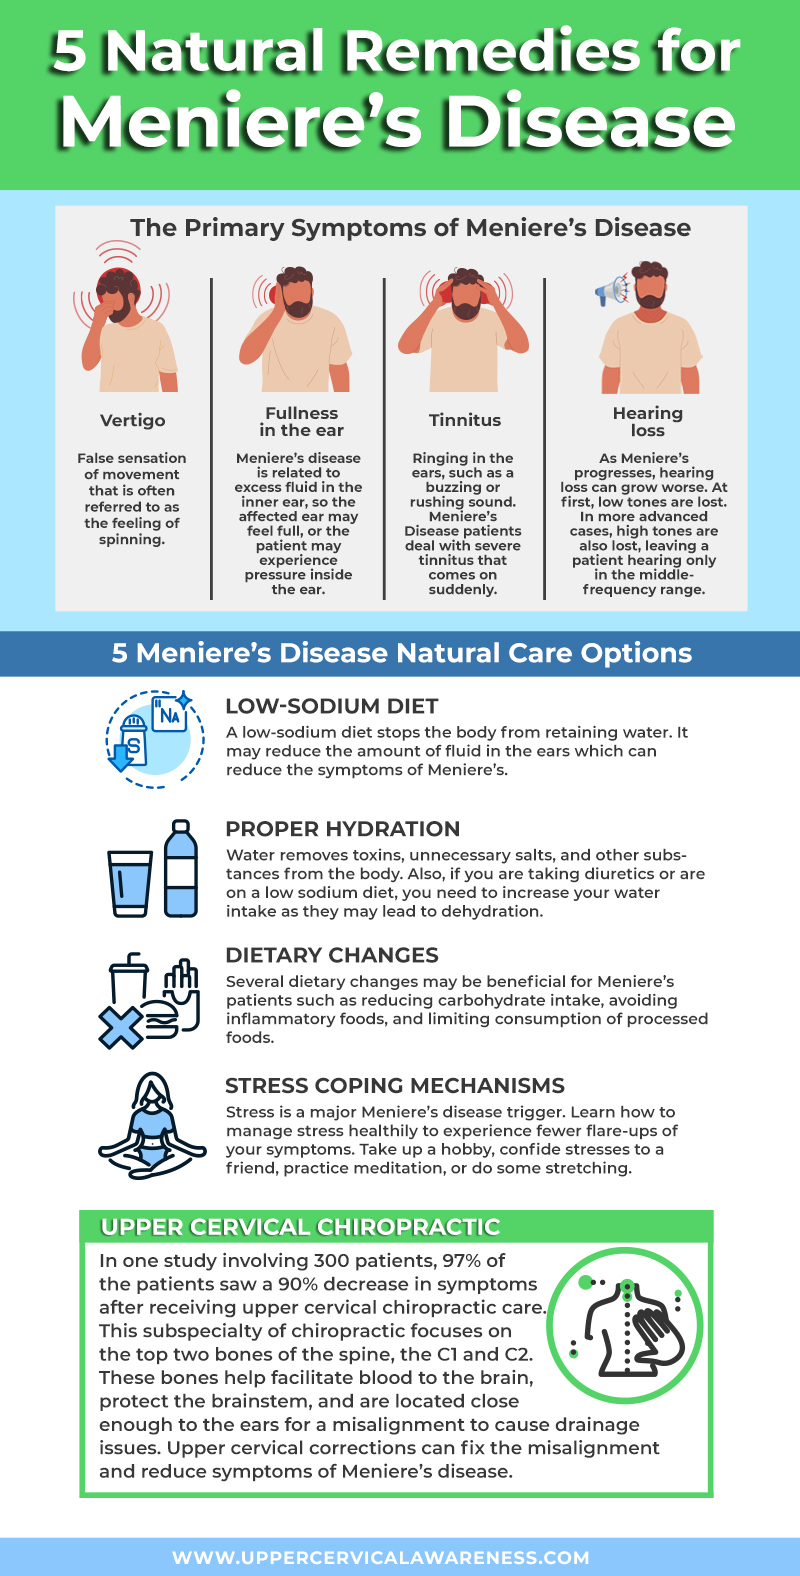 natural remedies, Meniere’s disease relief infographic